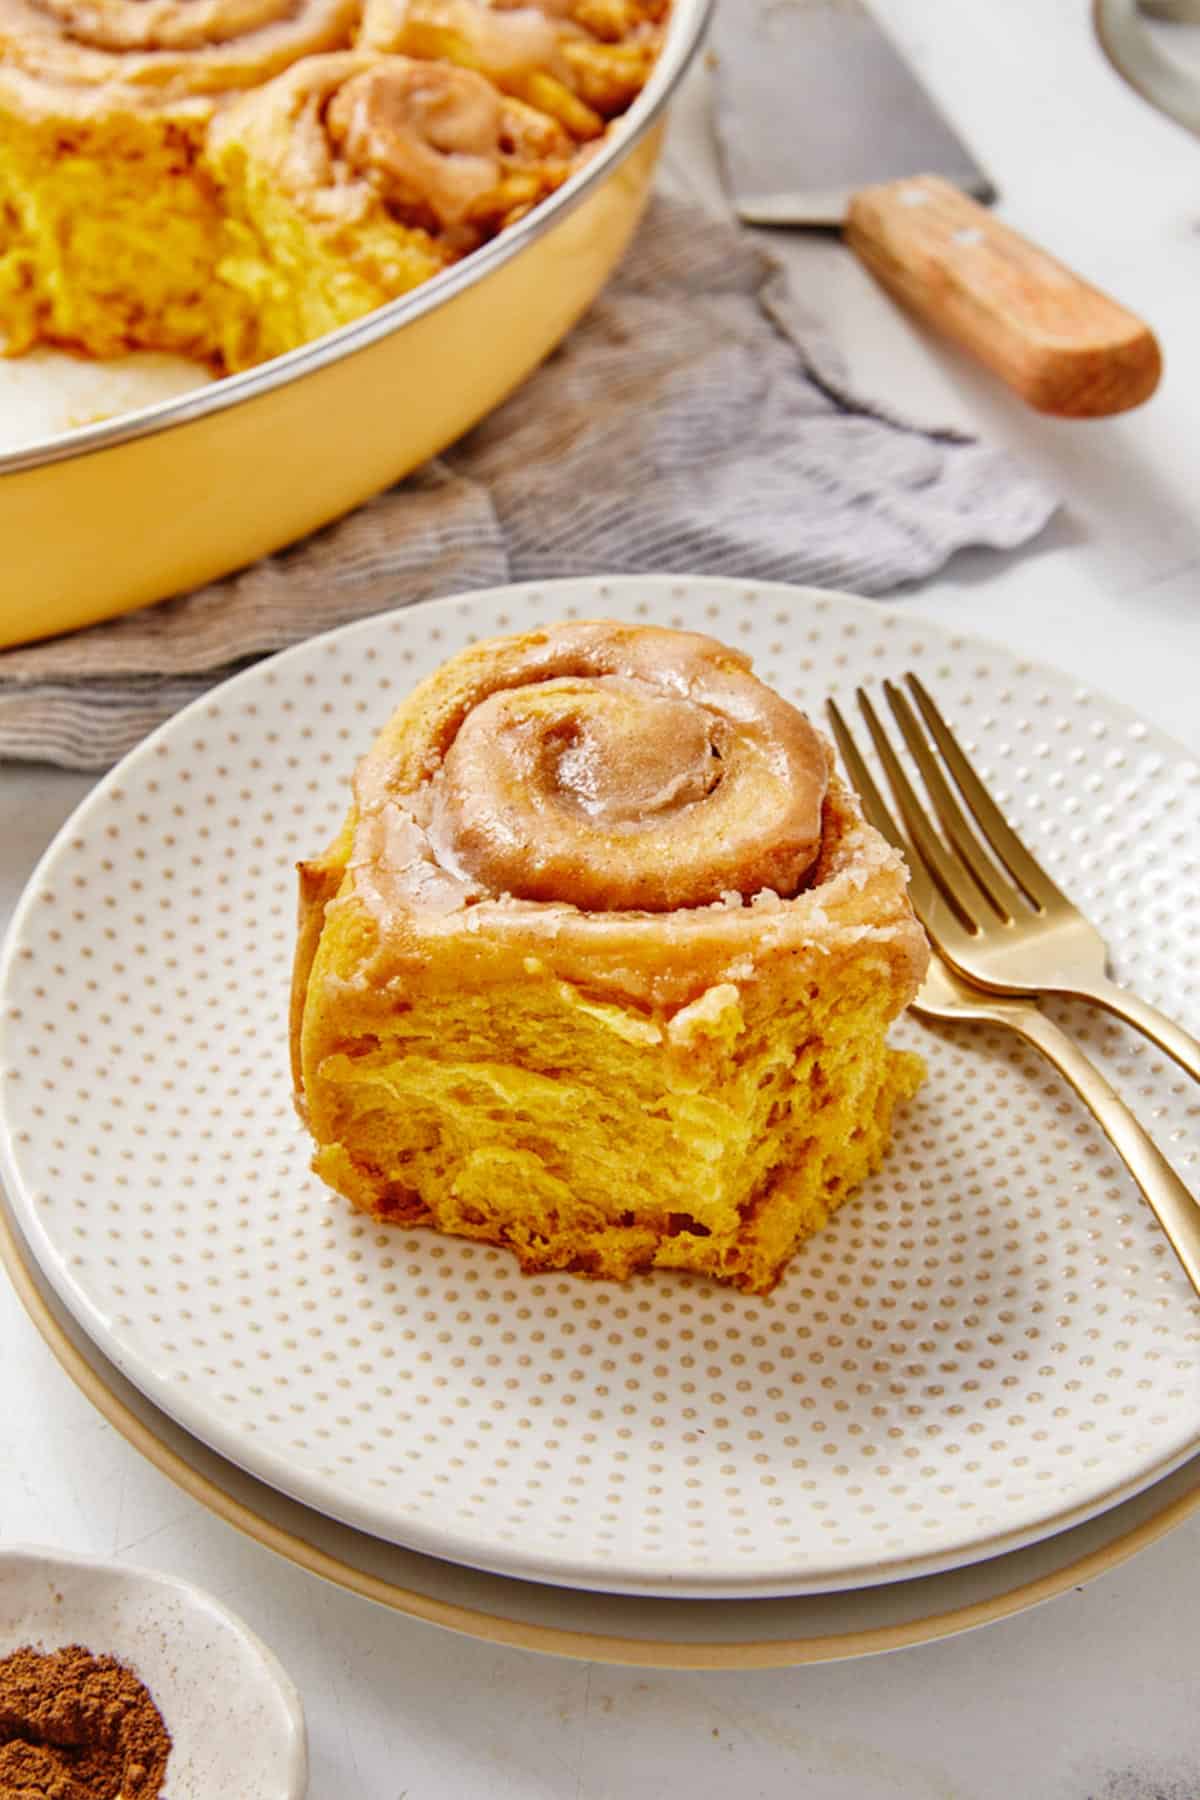 Pumpkin cinnamon roll on a plate with two forks and a pan of more in the background.